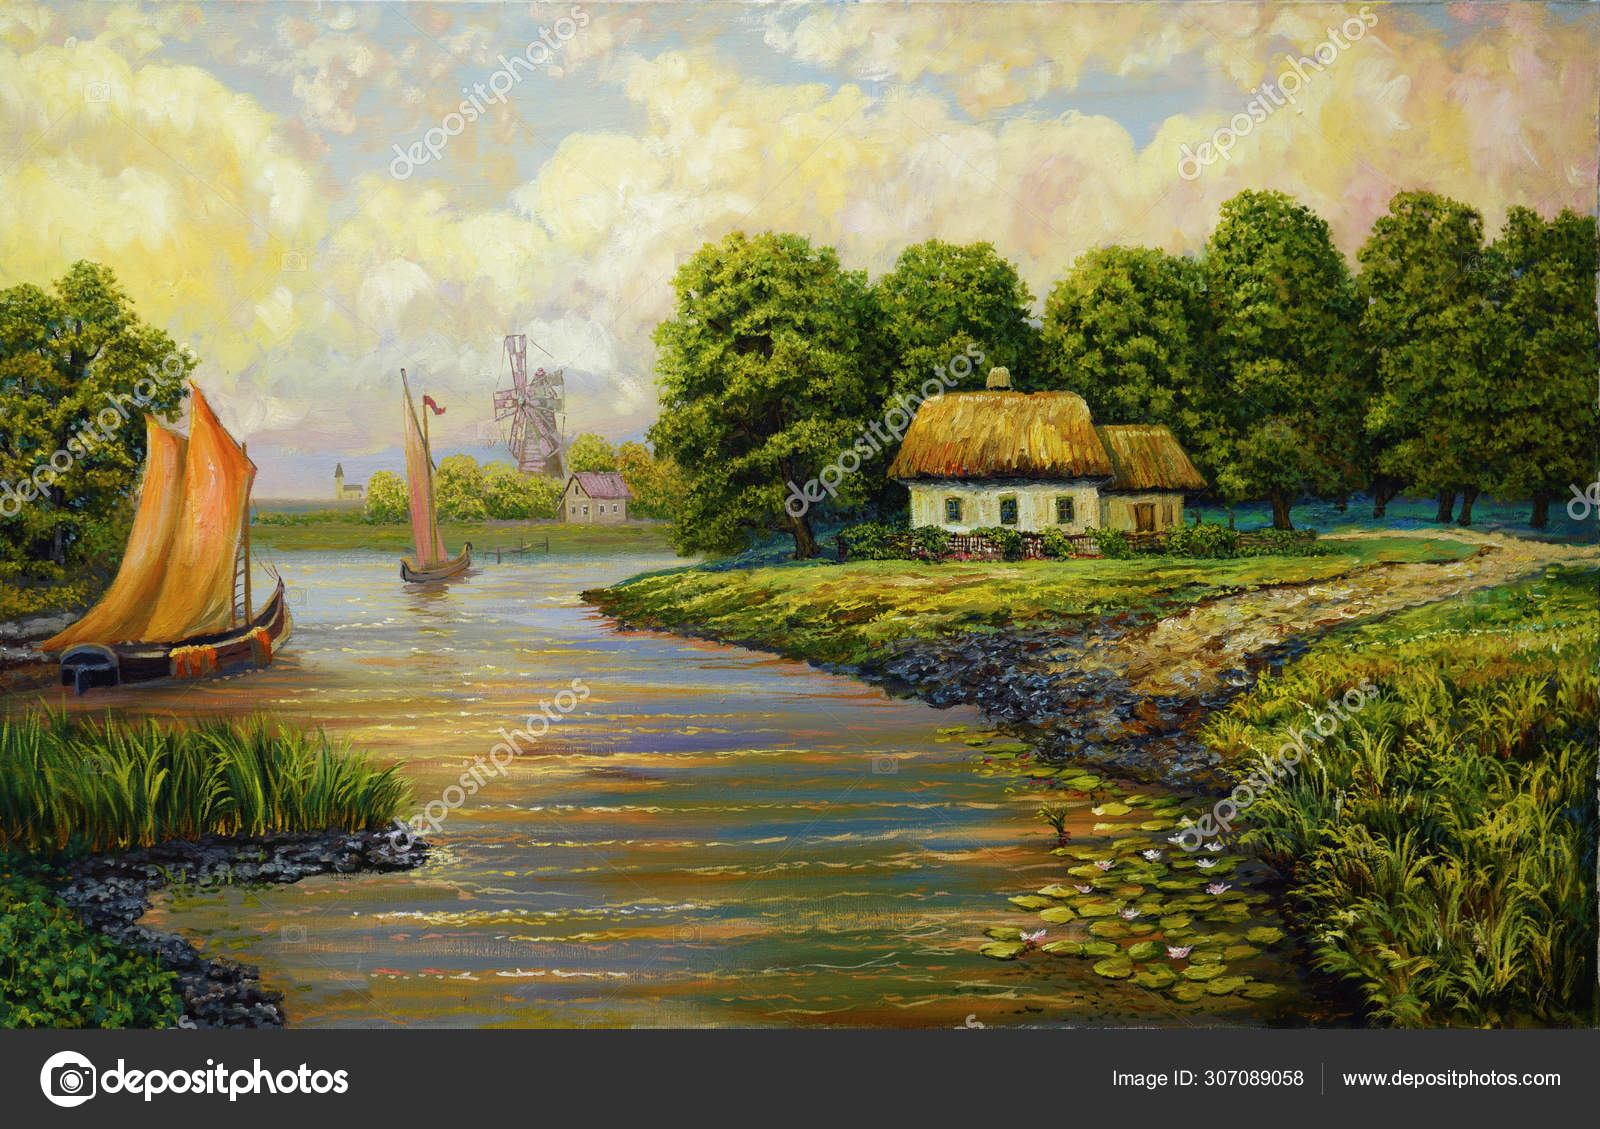 Nice Oil painting sunset landscape & ducks canoe by river village with church 